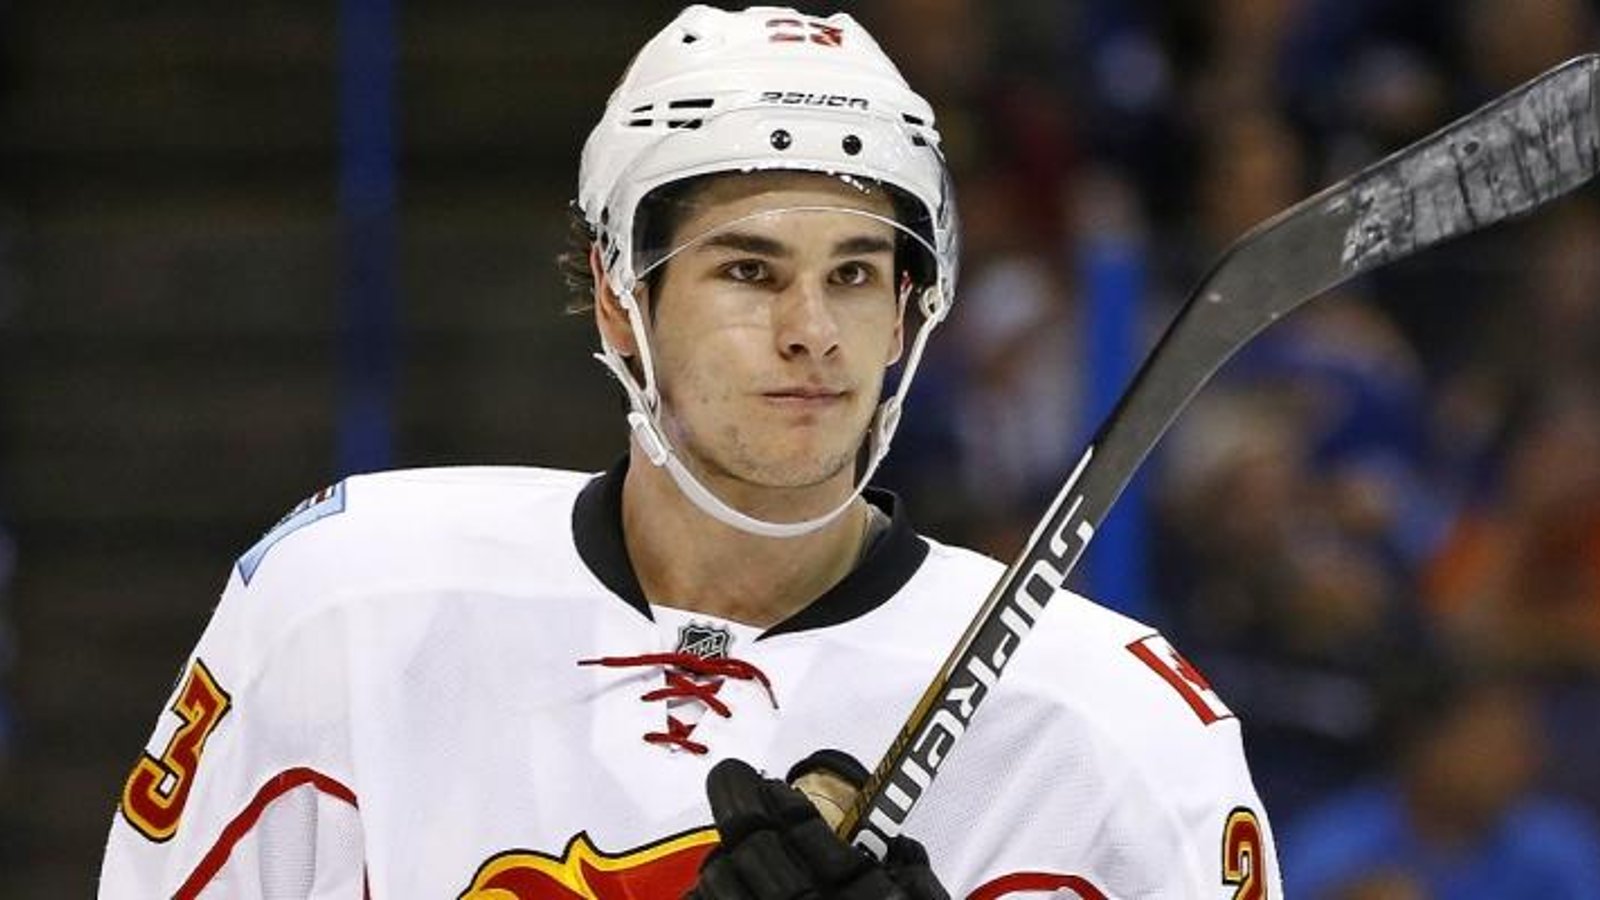 Big update on Sean Monahan negotiations from the man himself.